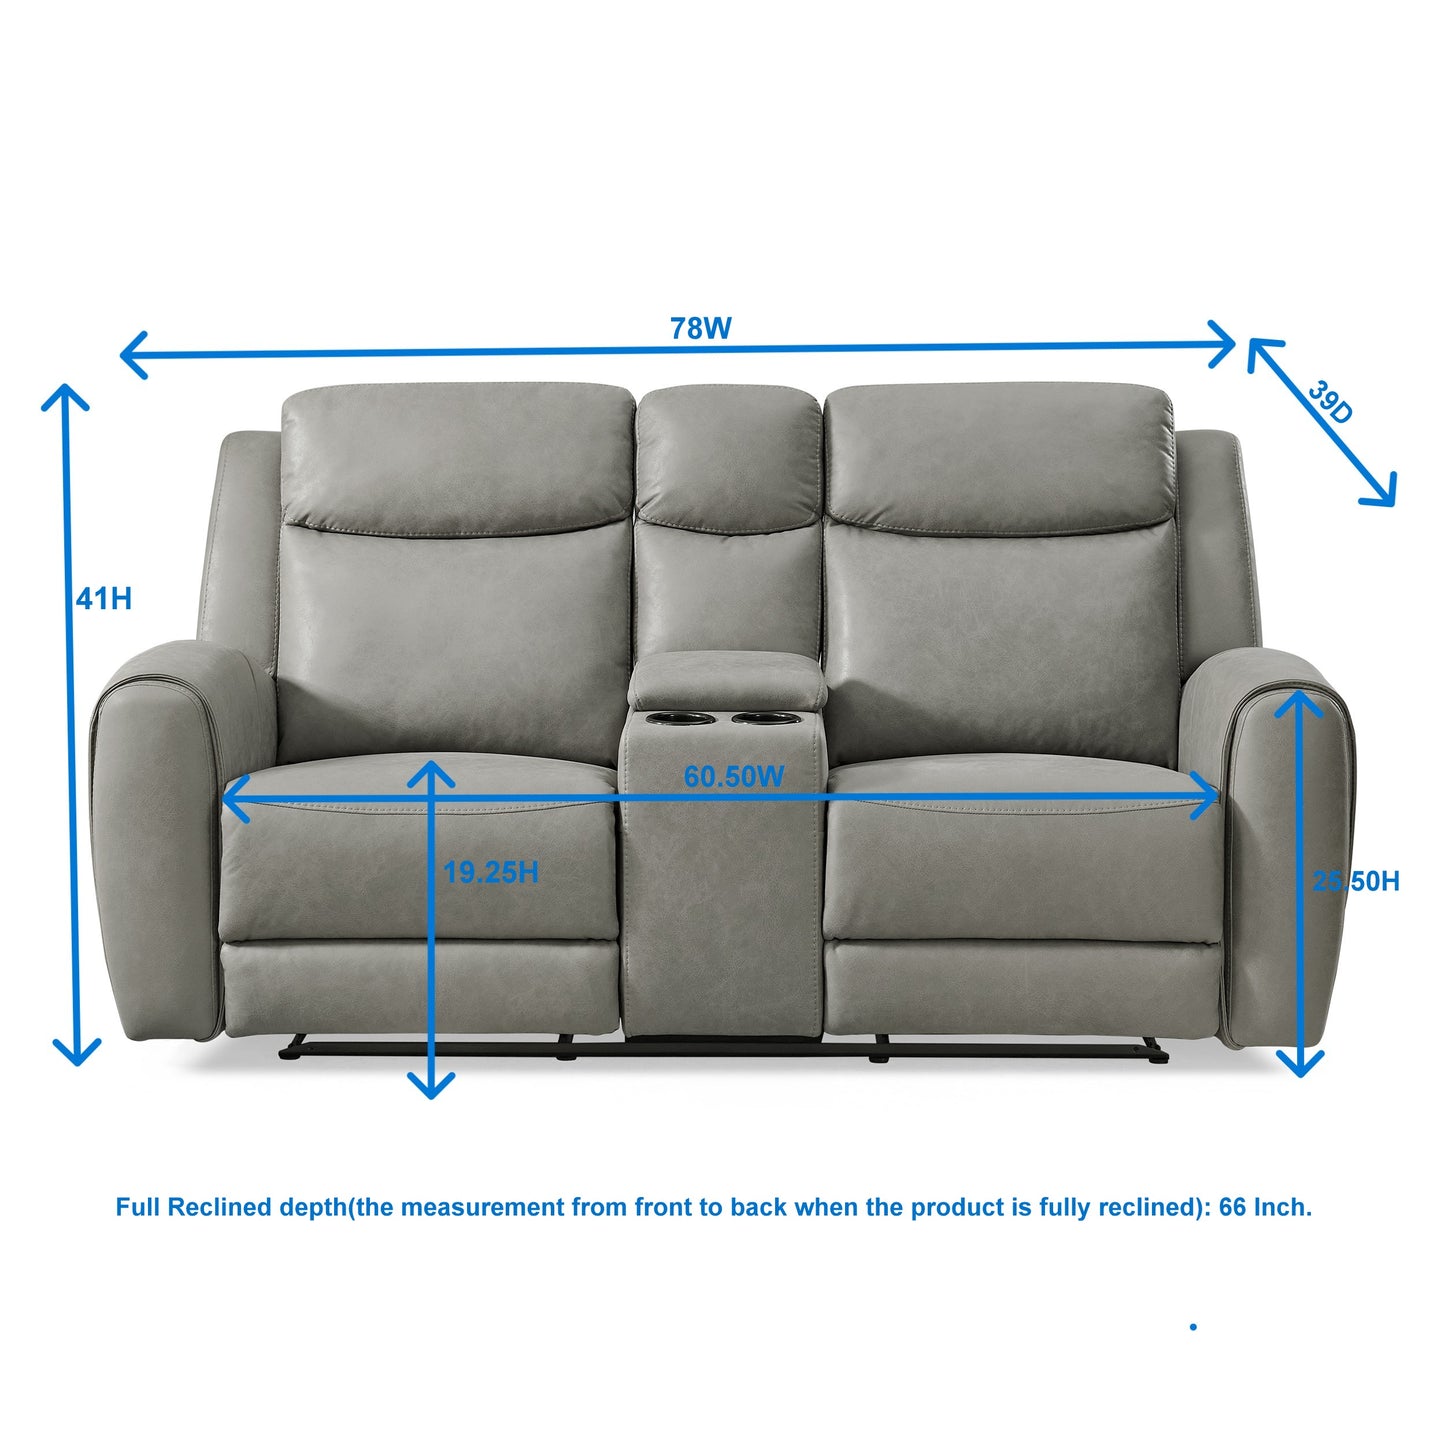 Wesley Transitional Living Room Reclining Collection, Sofa Loveseat and Recliner, Gray